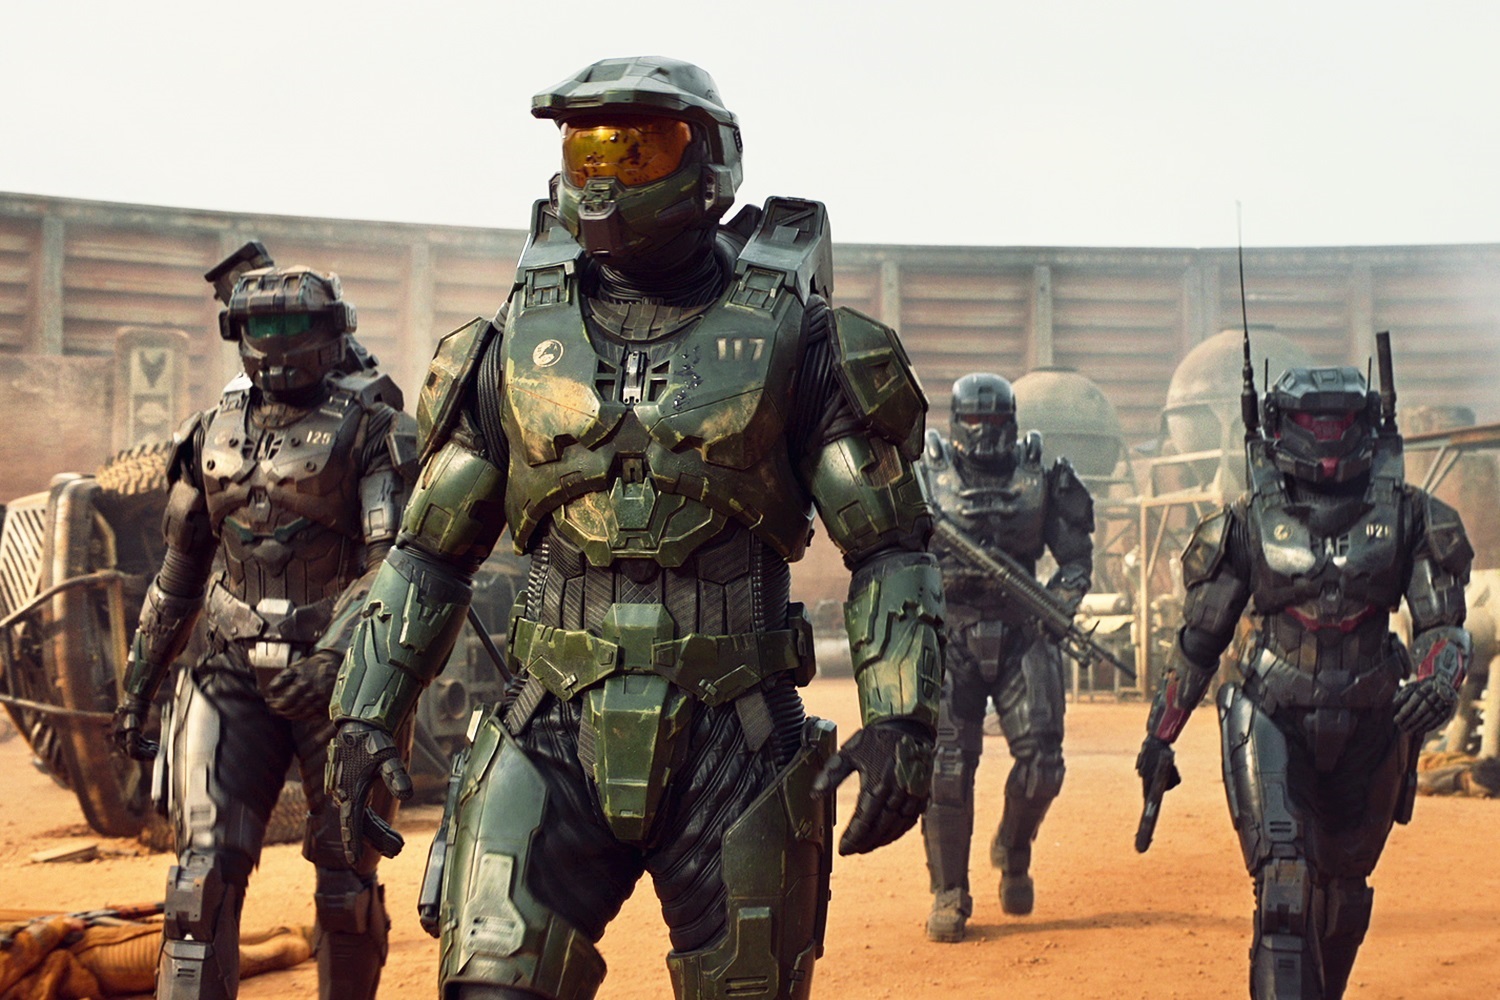 Xbox boss Phil Spencer says he wants the Halo show to be as good as The Last of Us